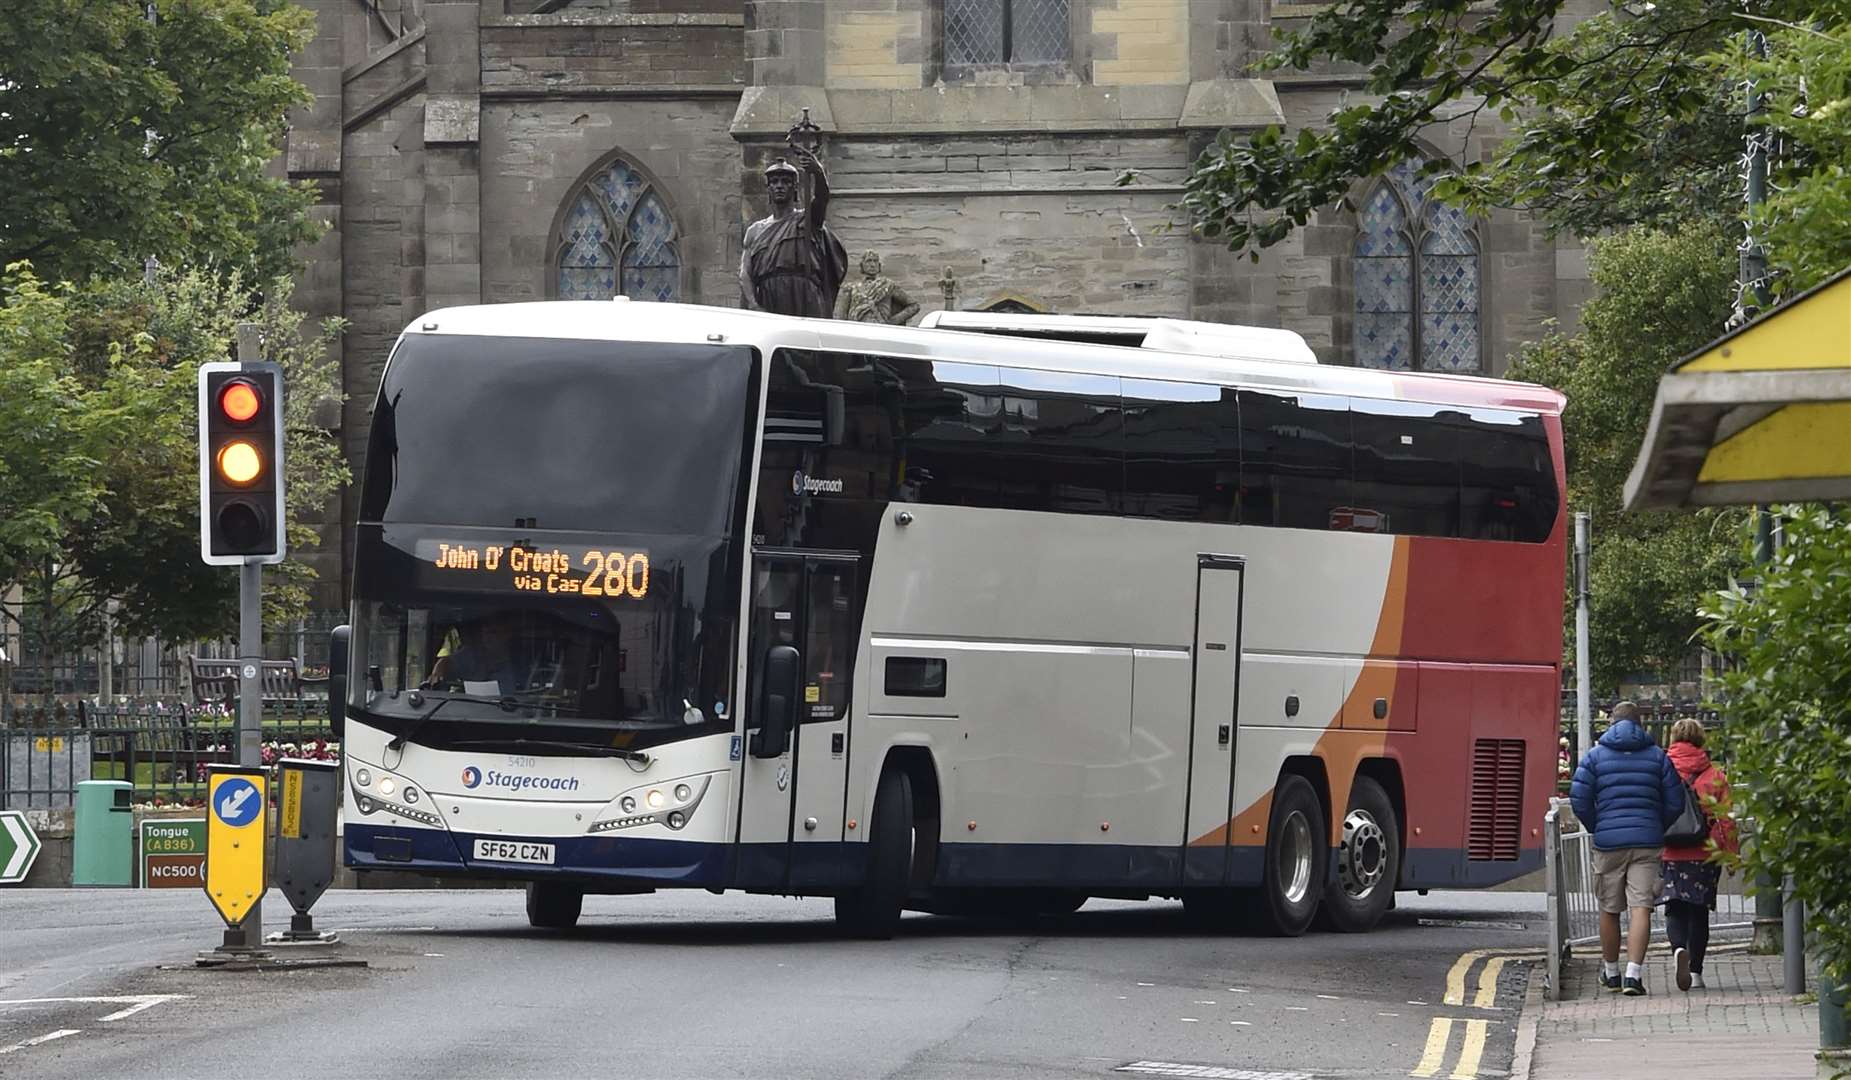 A Stagecoach bus in Thurso (library image).